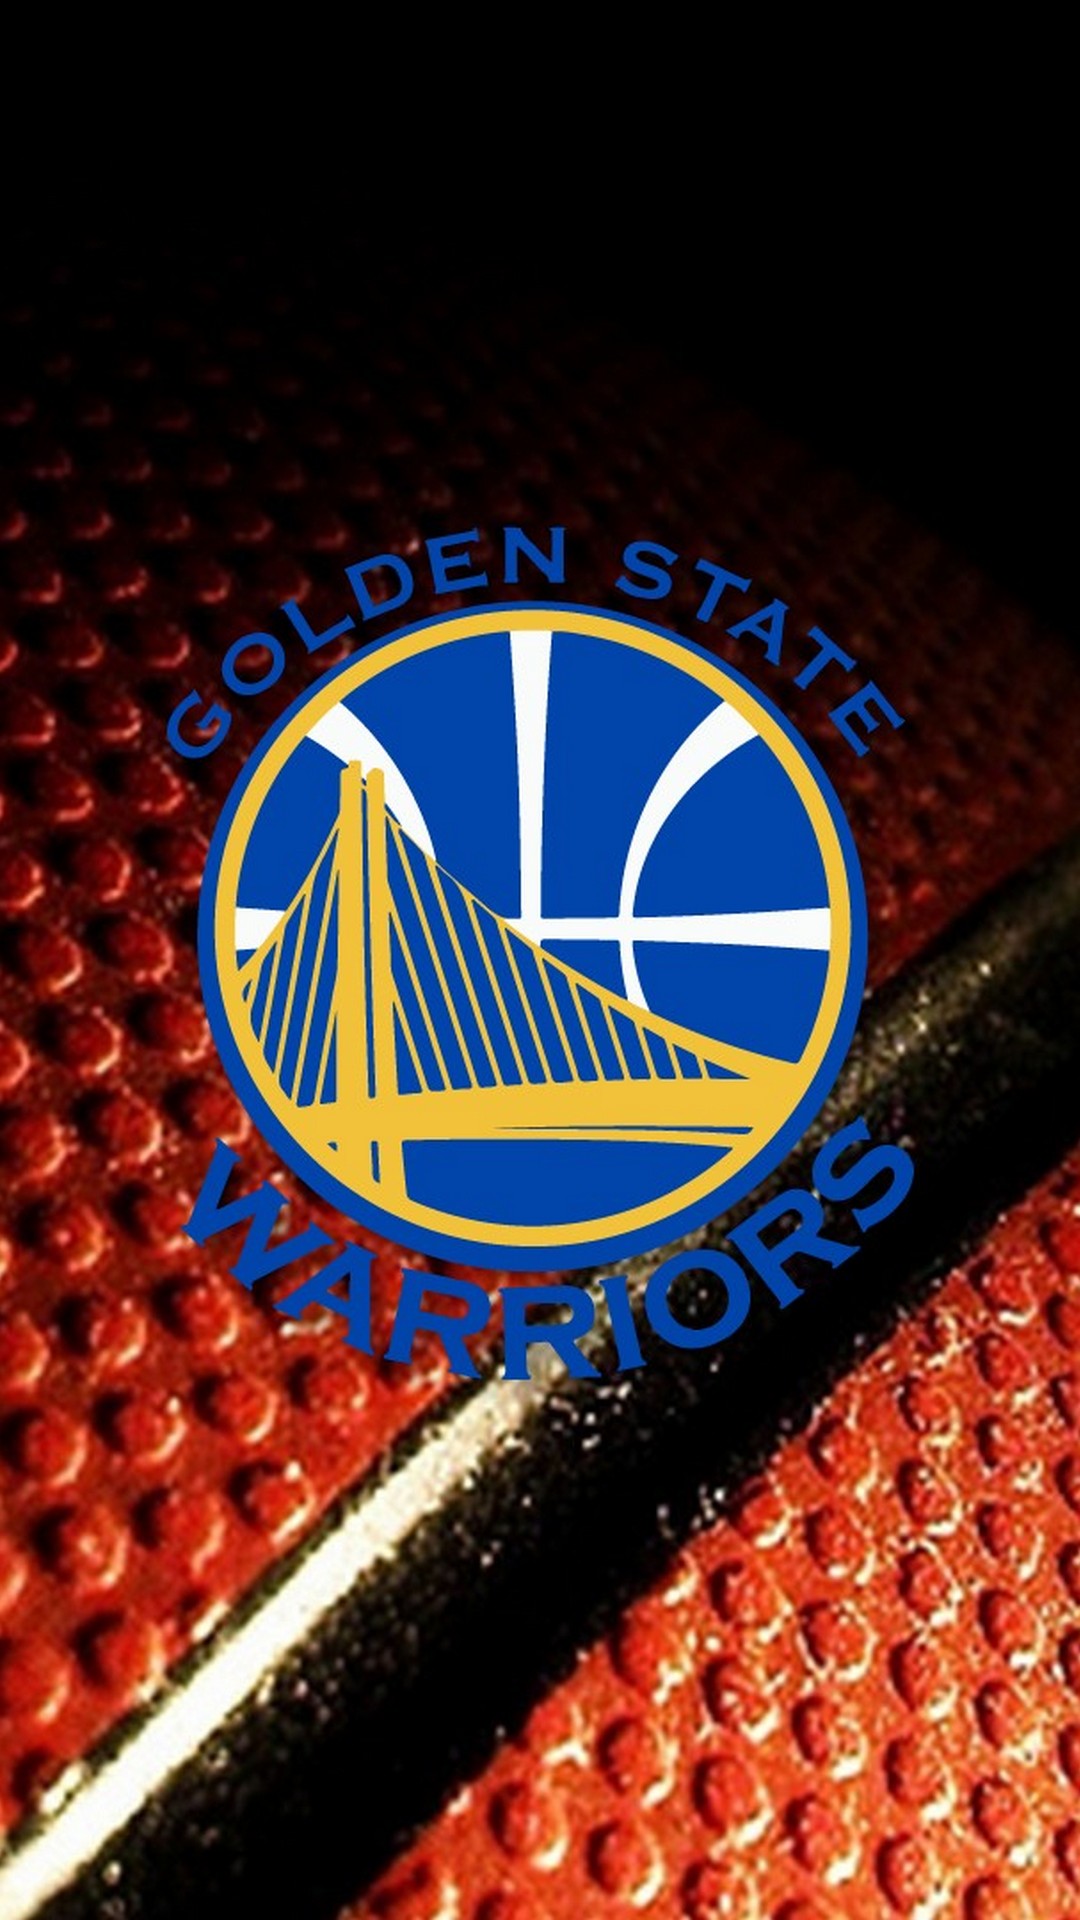 Golden State iPhone 6 Wallpaper with image dimensions 1080x1920 pixel. You can make this wallpaper for your Desktop Computer Backgrounds, Windows or Mac Screensavers, iPhone Lock screen, Tablet or Android and another Mobile Phone device